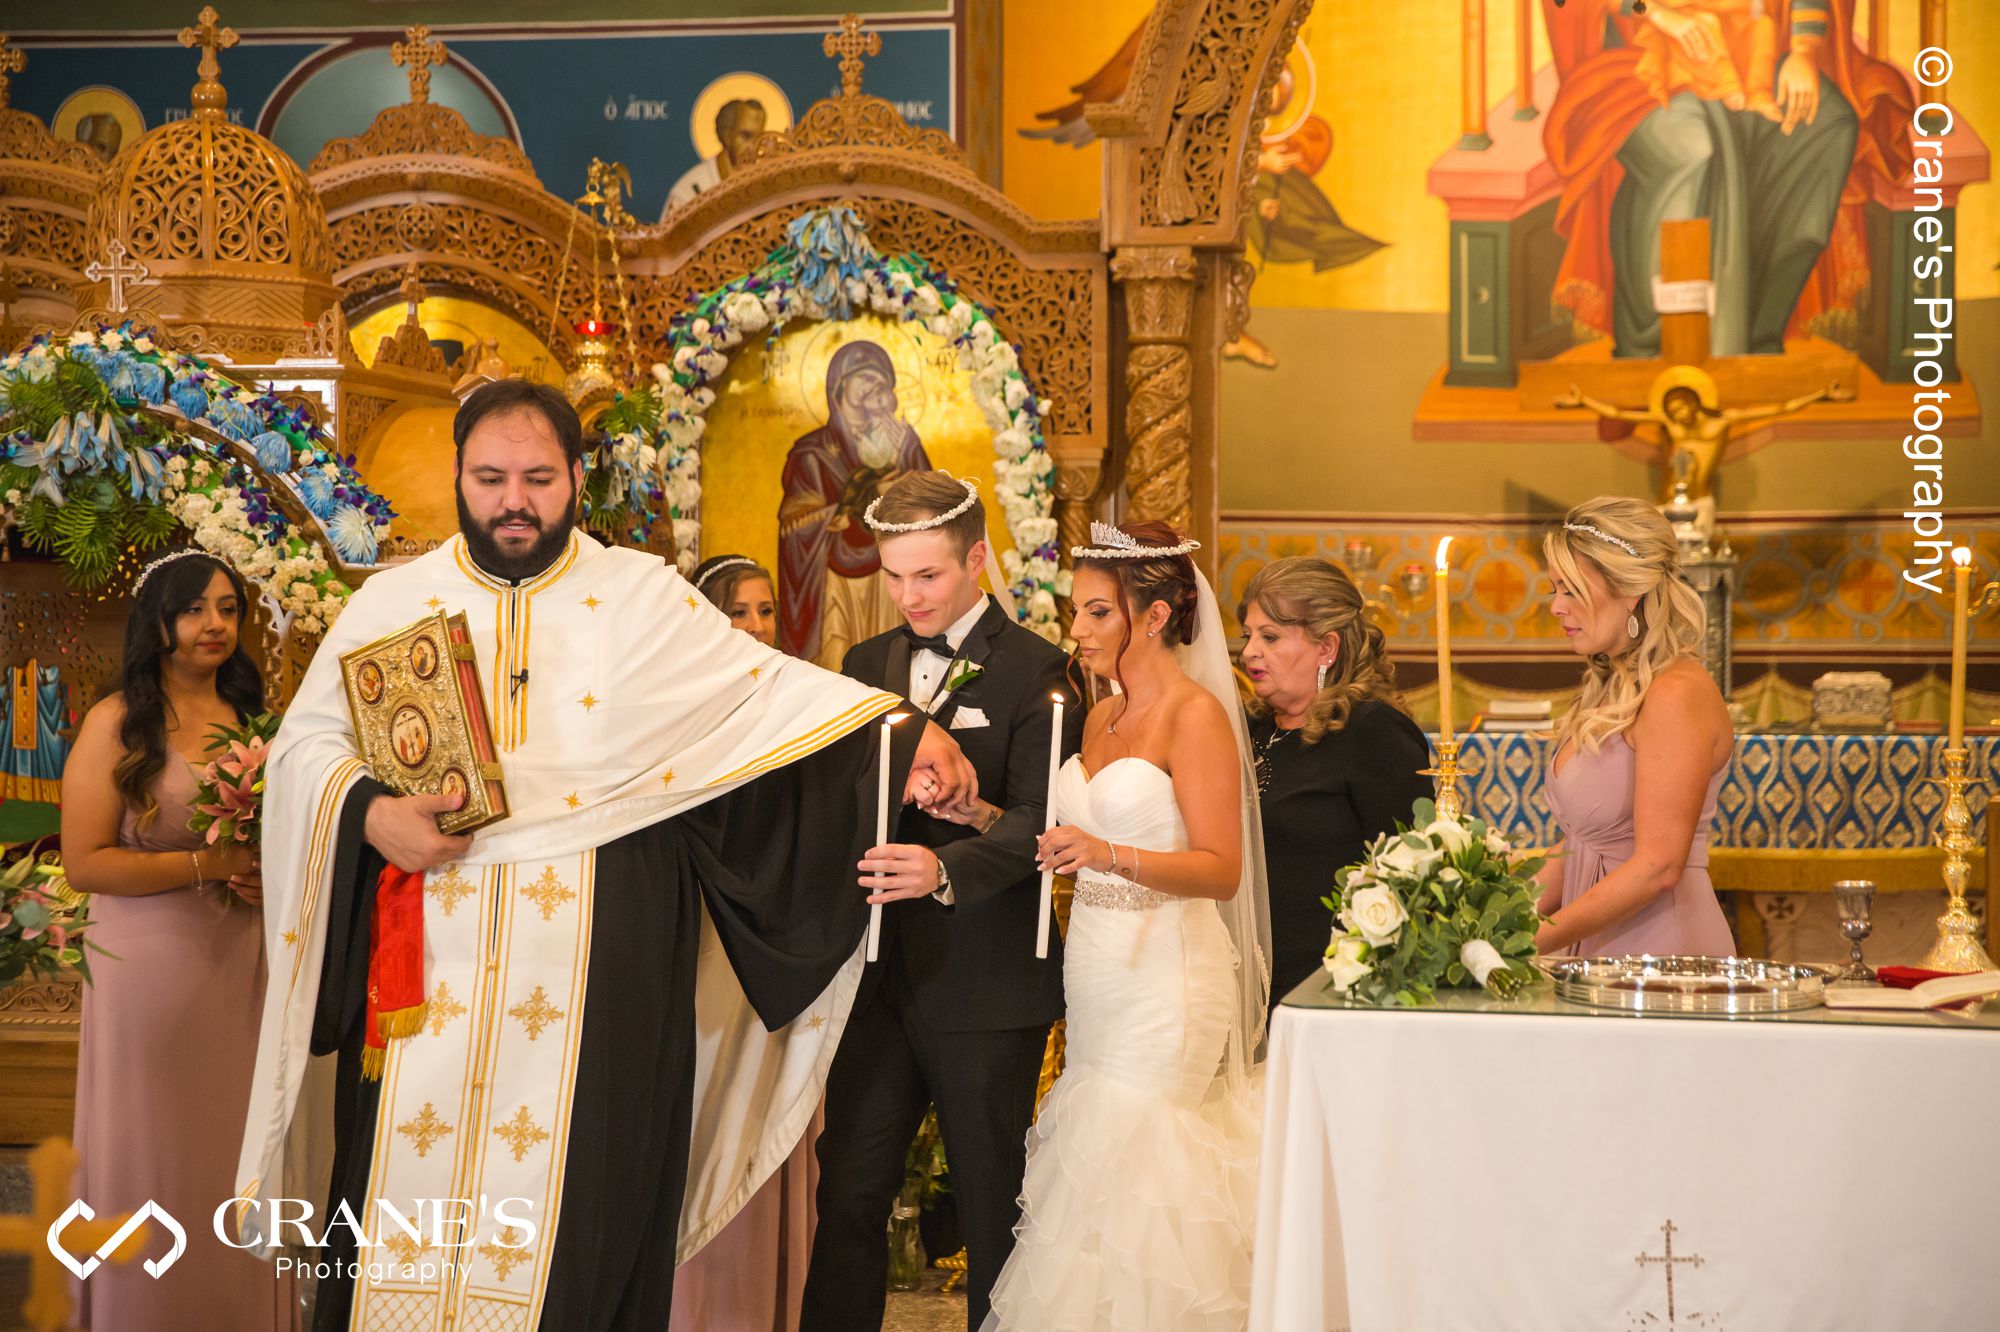 Bride and groom perform The Ceremonial Walk at the altar of St. Nectarios in Palatine during an orthodox wedding ceremony